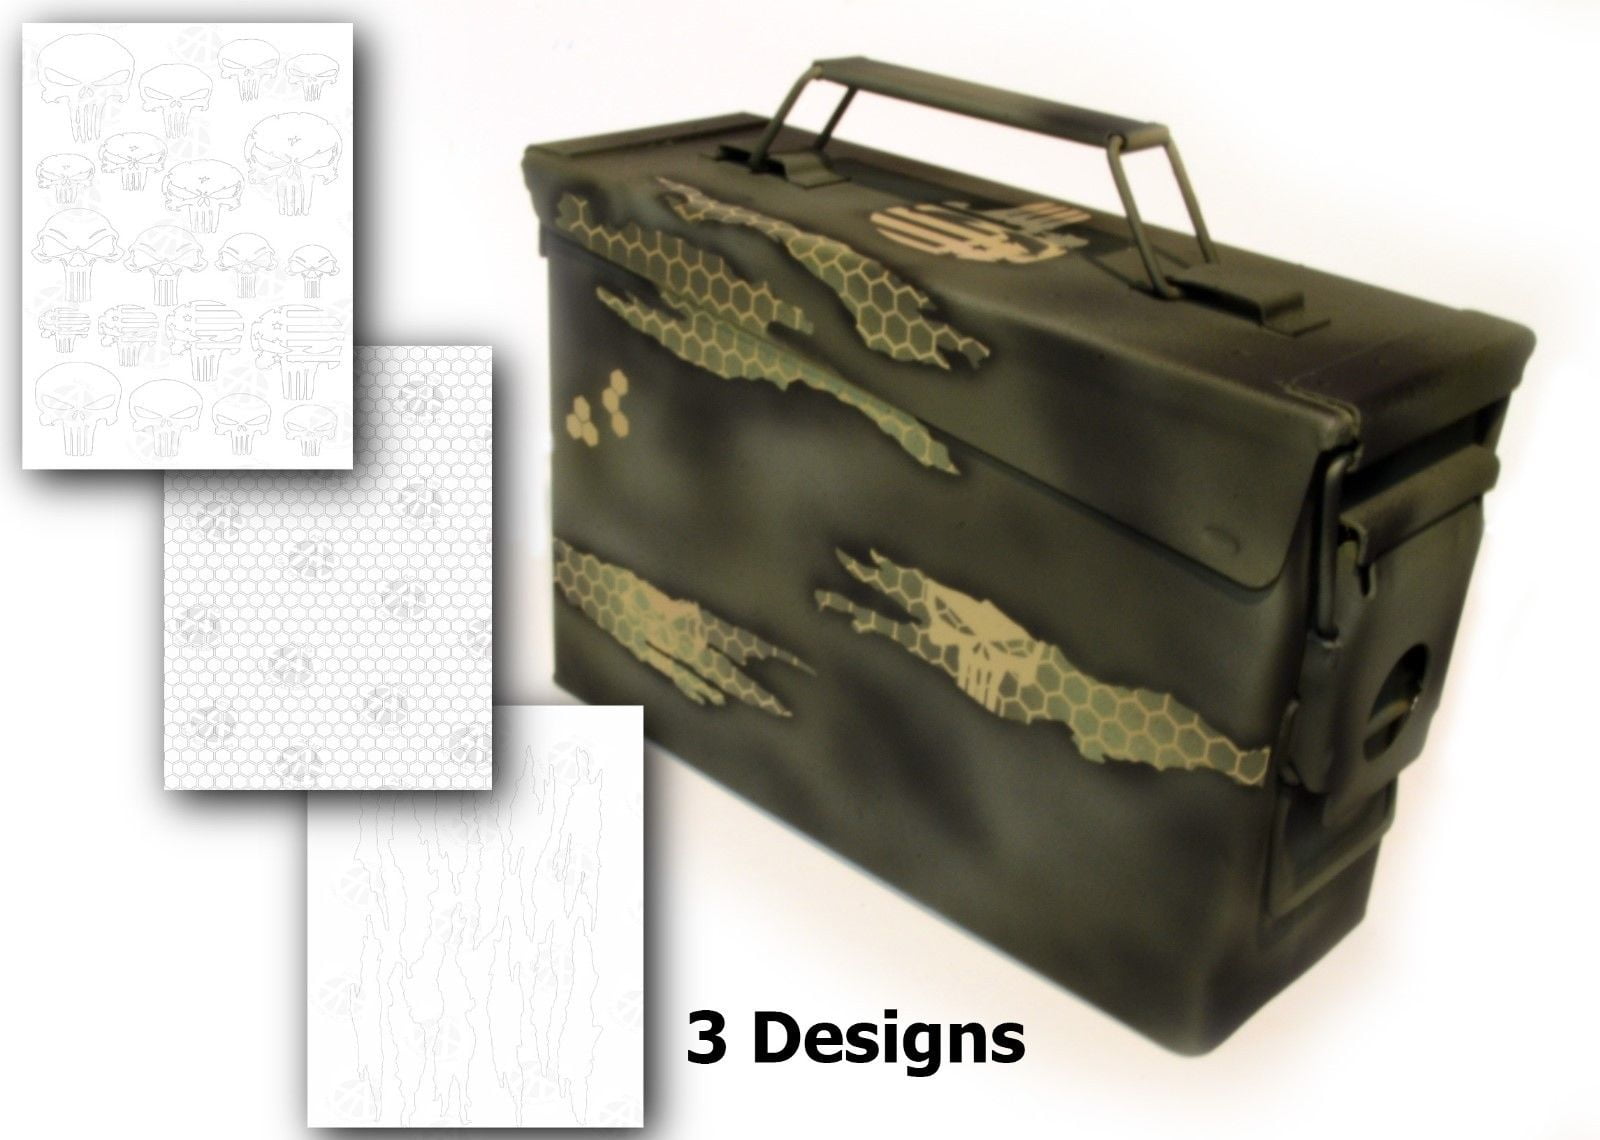 Spray Airbrush Paint Camouflage Stencils 10 Mil Camo Duracoat 9x14